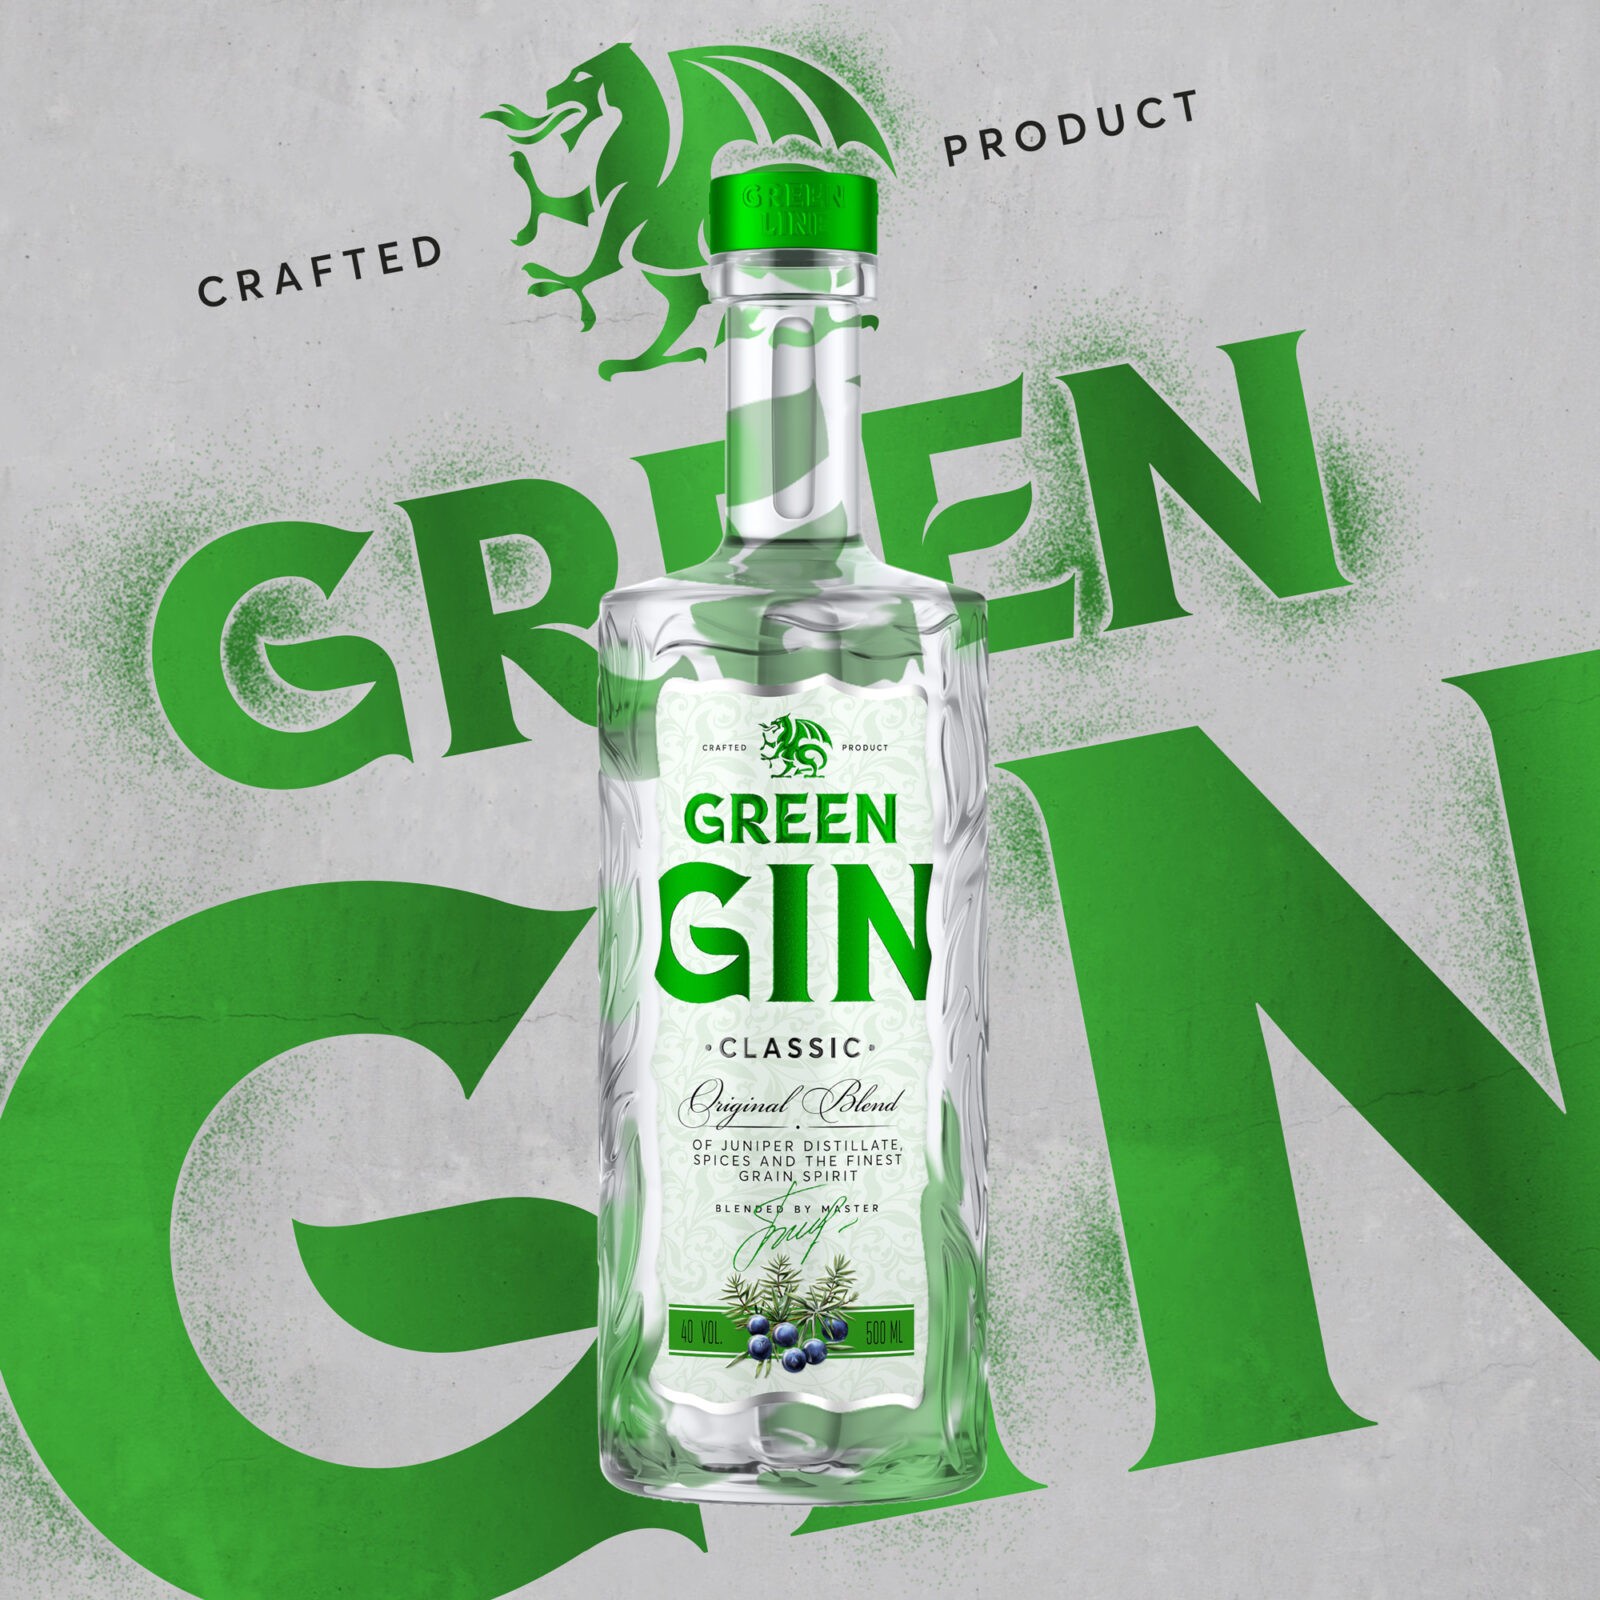 ARMBRAND Enhances Green Gin’s Distinctive Design, Influenced by the Year of the Dragon